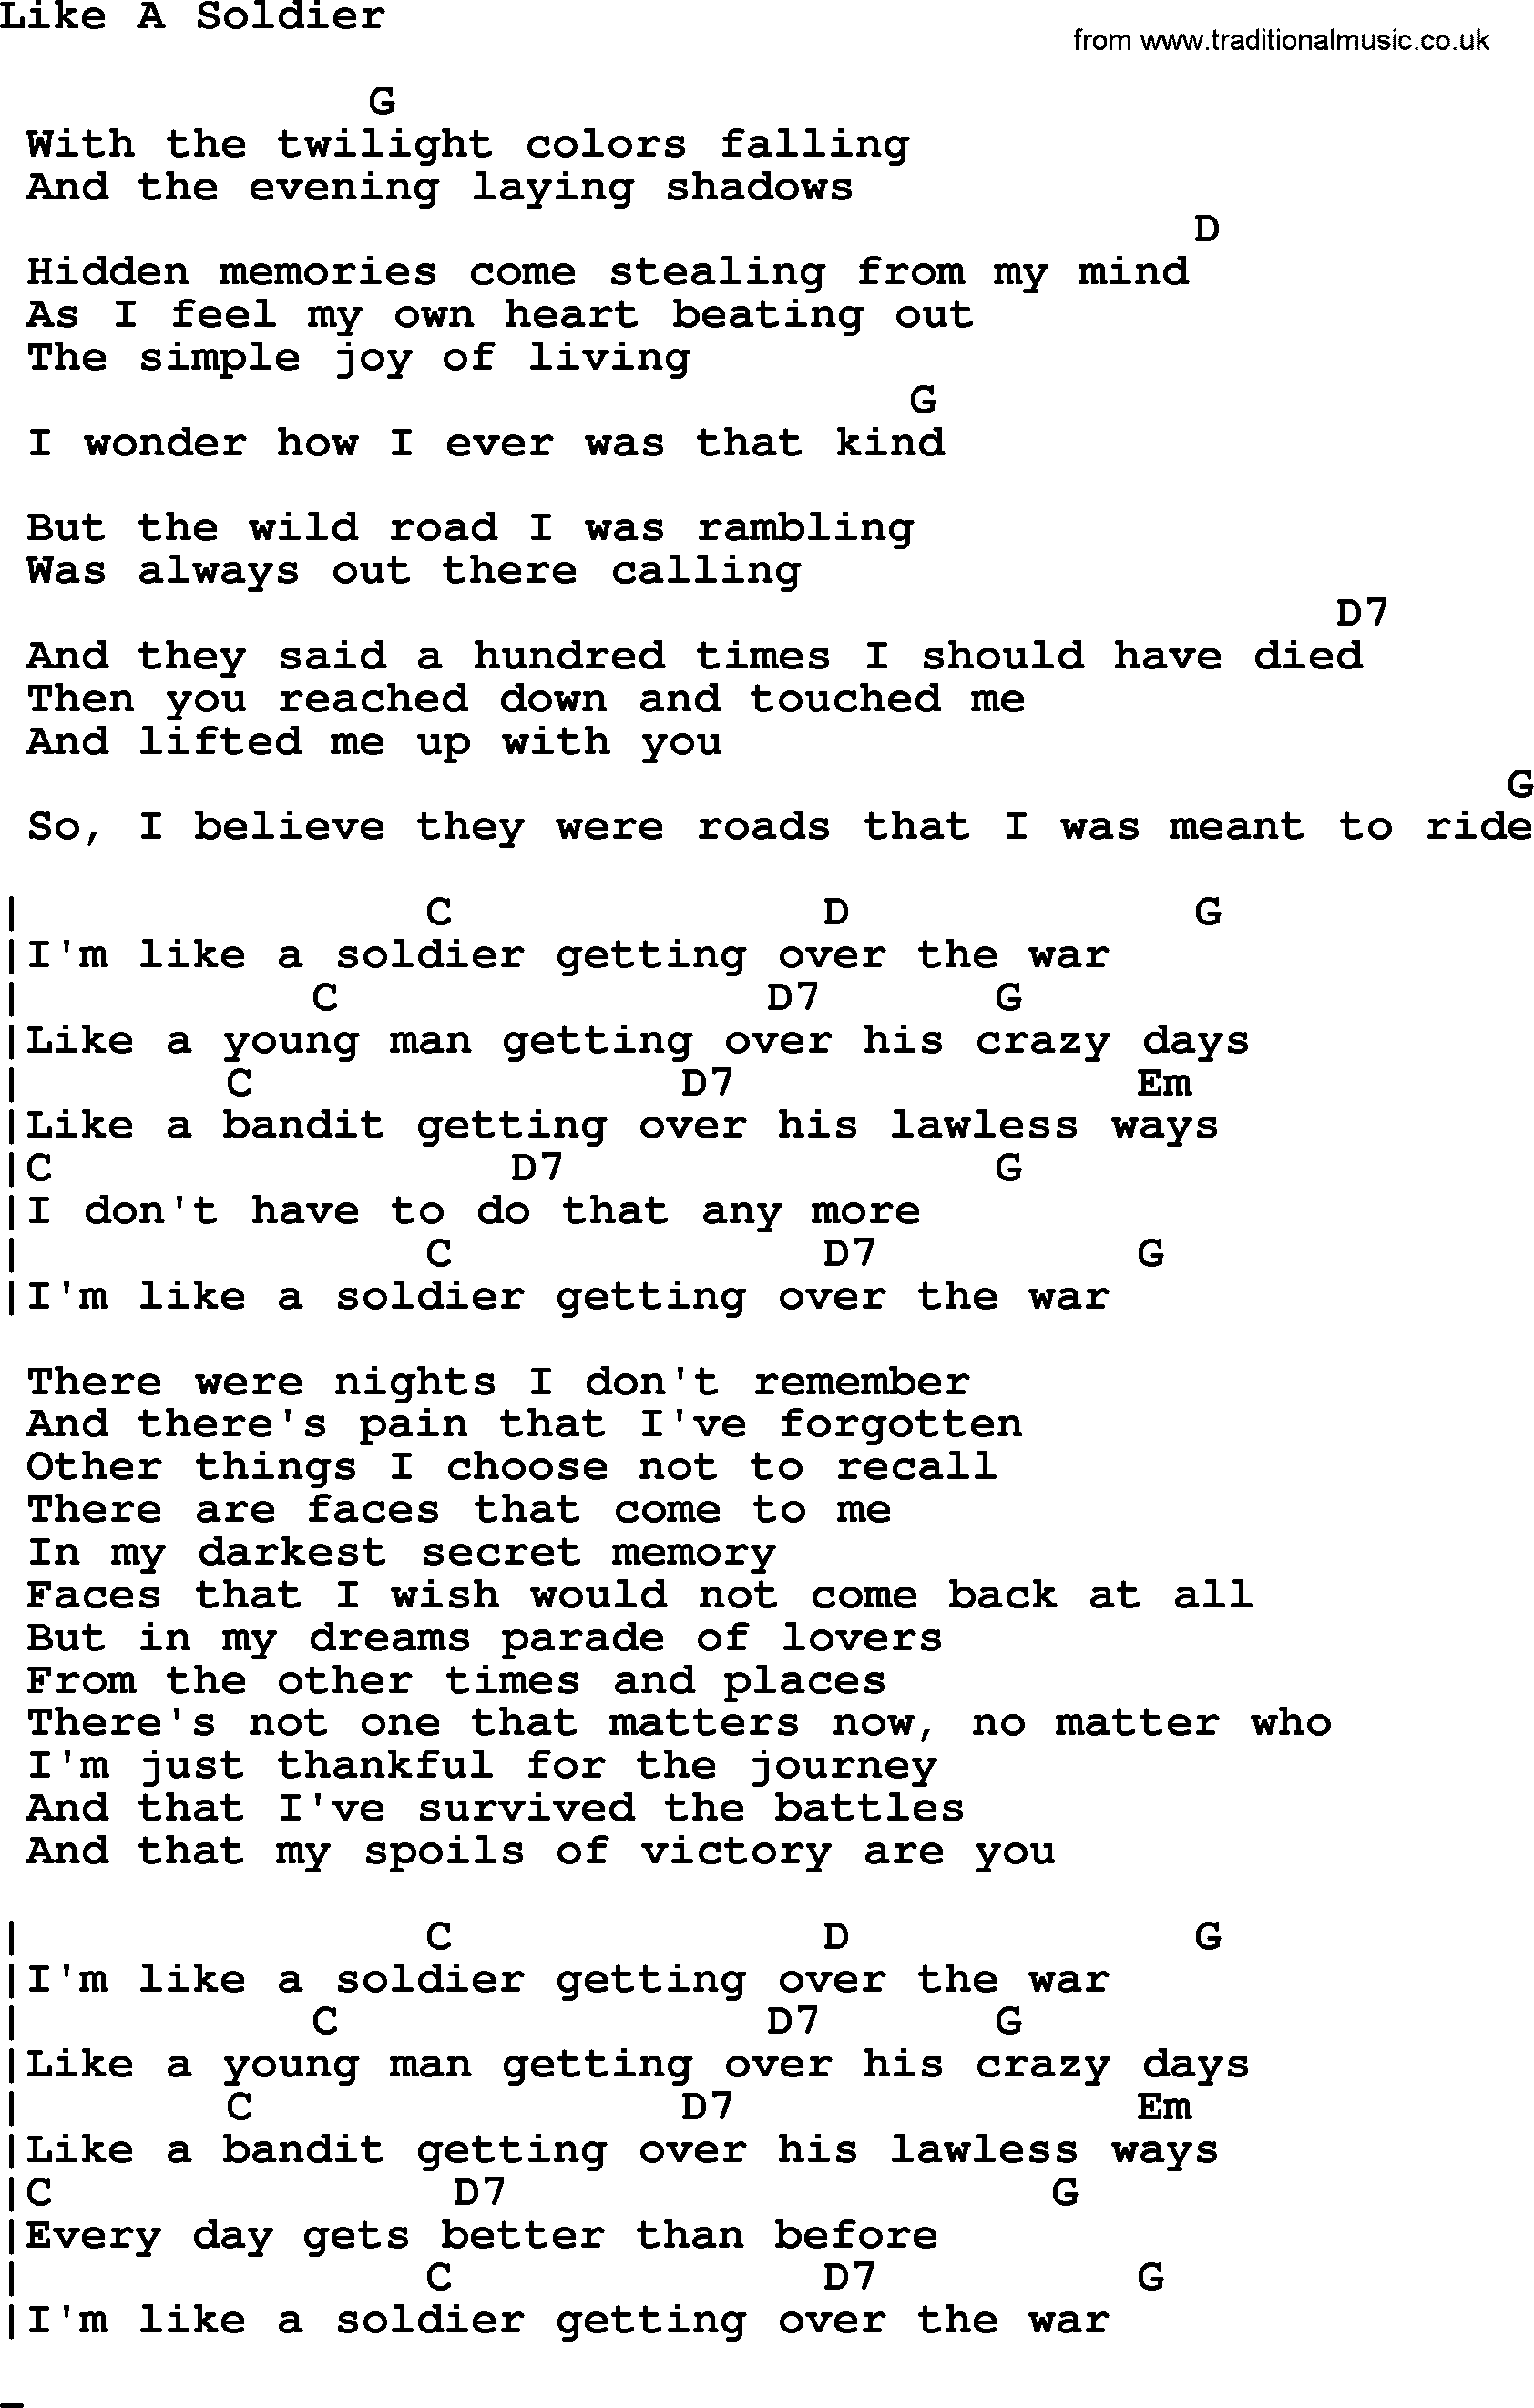 Johnny Cash song Like A Soldier, lyrics and chords